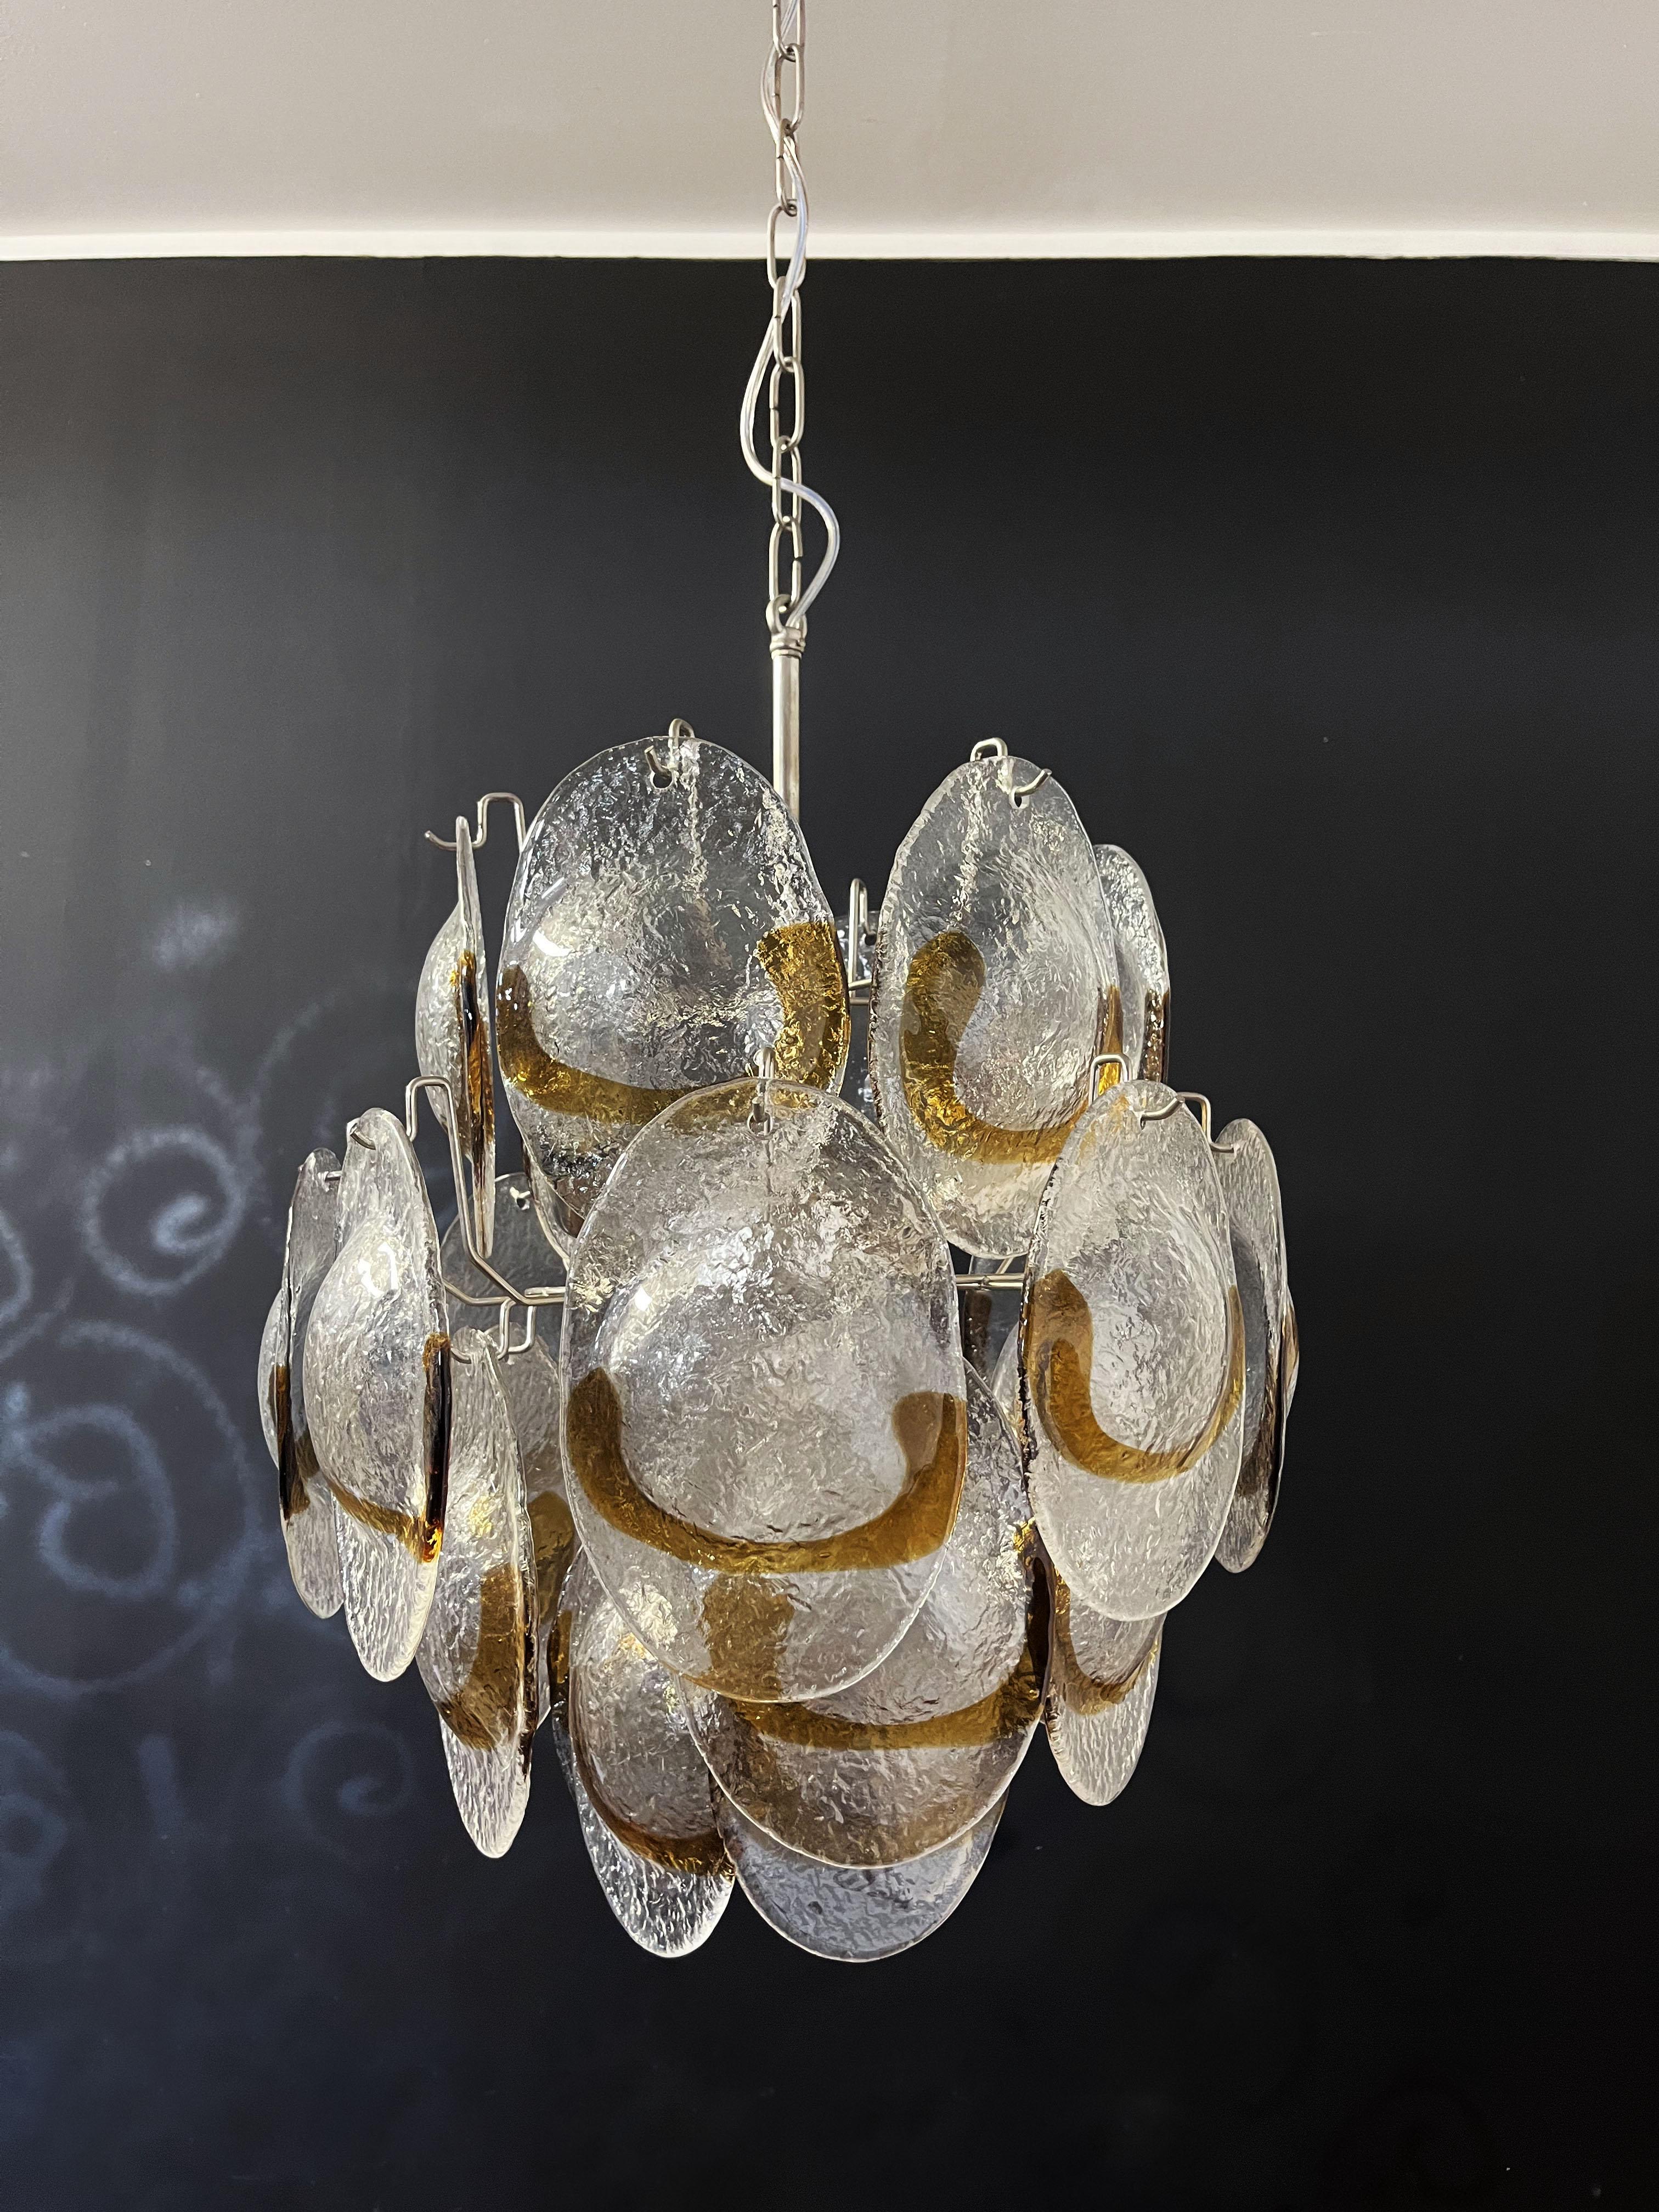 Vintage Italian Murano chandelier in Vistosi style. The chandelier has 24 glasses in a nickel metal frame. The originality of this chandelier is given by the glass, wonderful works of art trasparent and amber, called shells. Murano blown glass in a